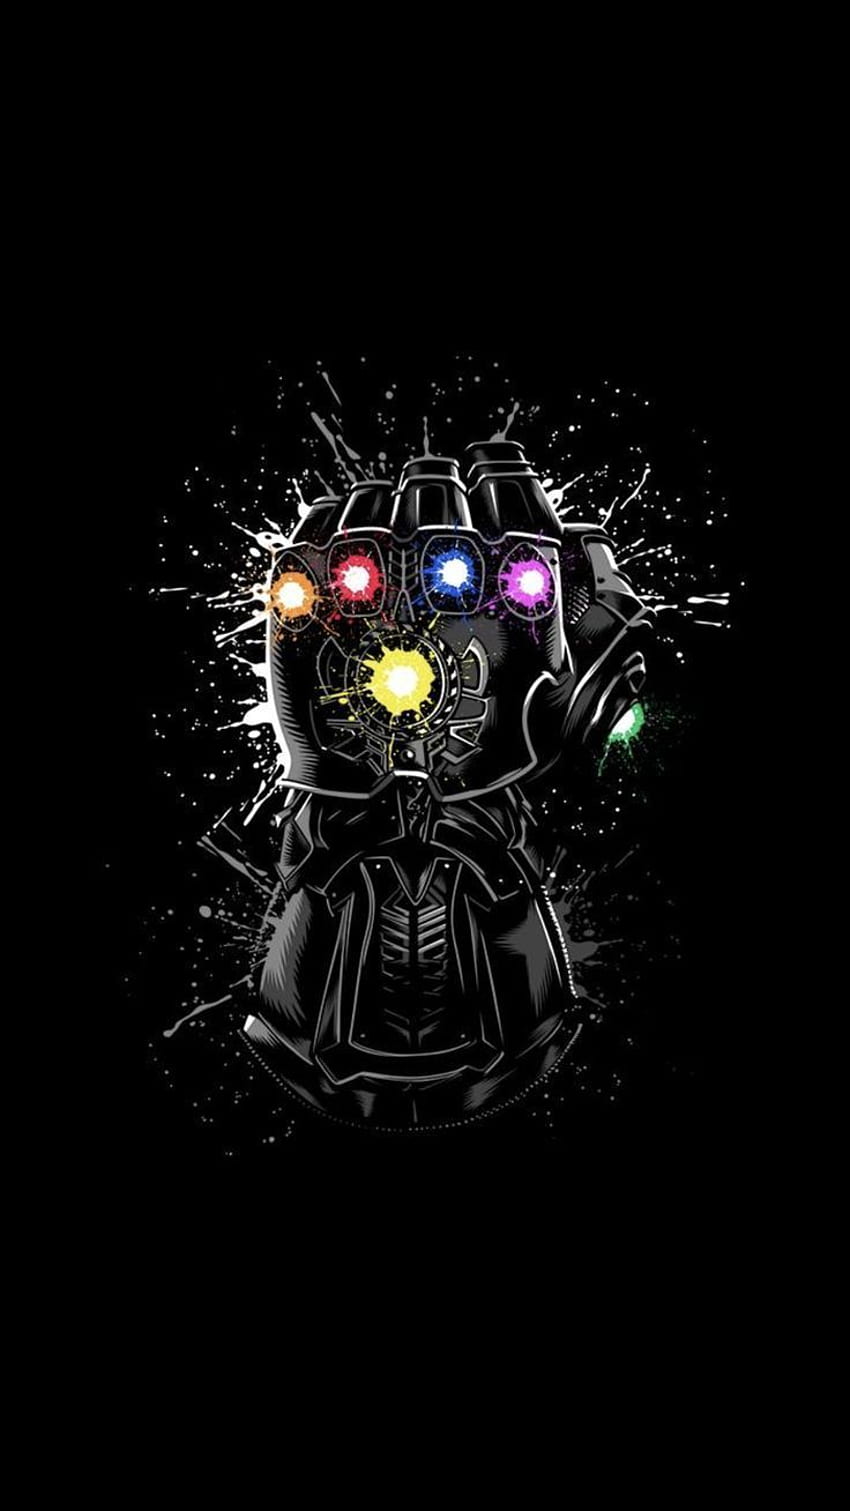 Infinity stone How the black and white make the colors pop. - Phone . Marvel villains, Marvel , Thanos marvel HD phone wallpaper